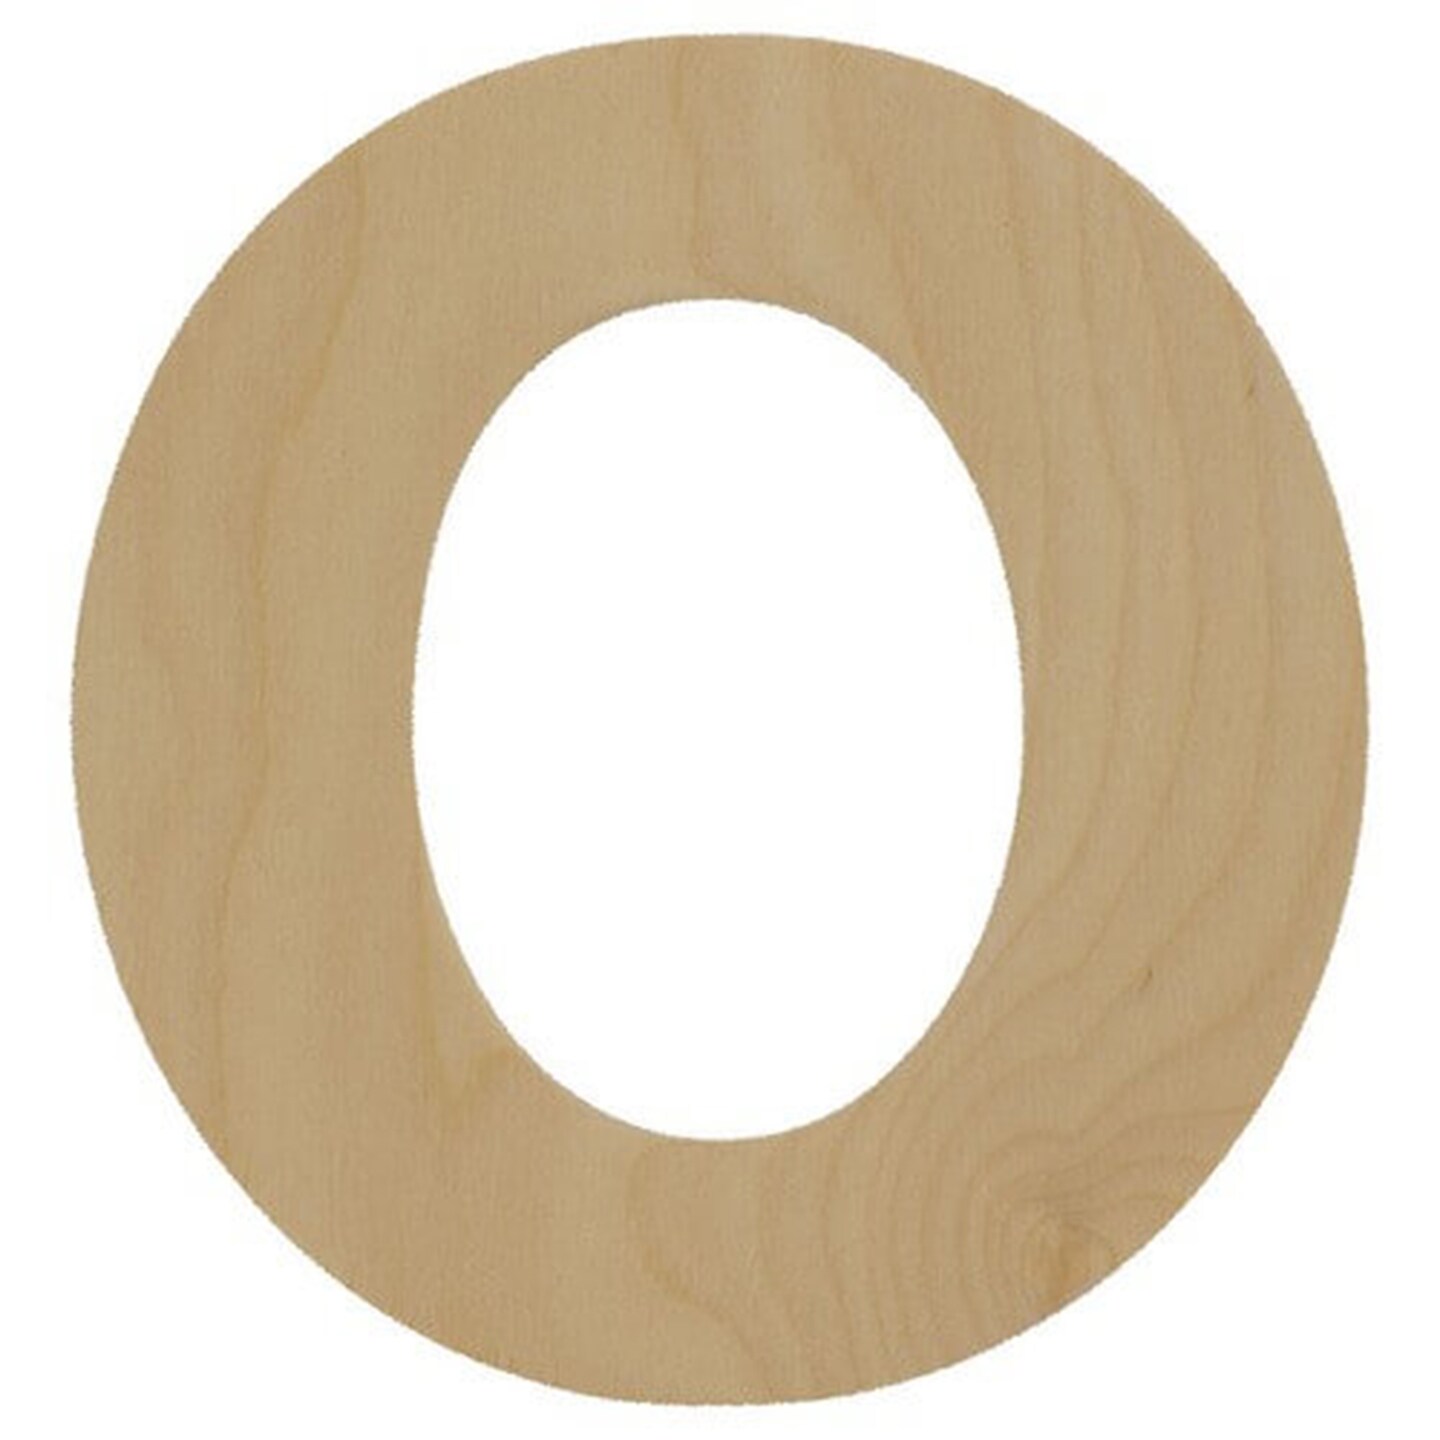 Wooden Number 0, 12 inch or 8 inch, Unfinished Large Wood Numbers for Crafts | Woodpeckers